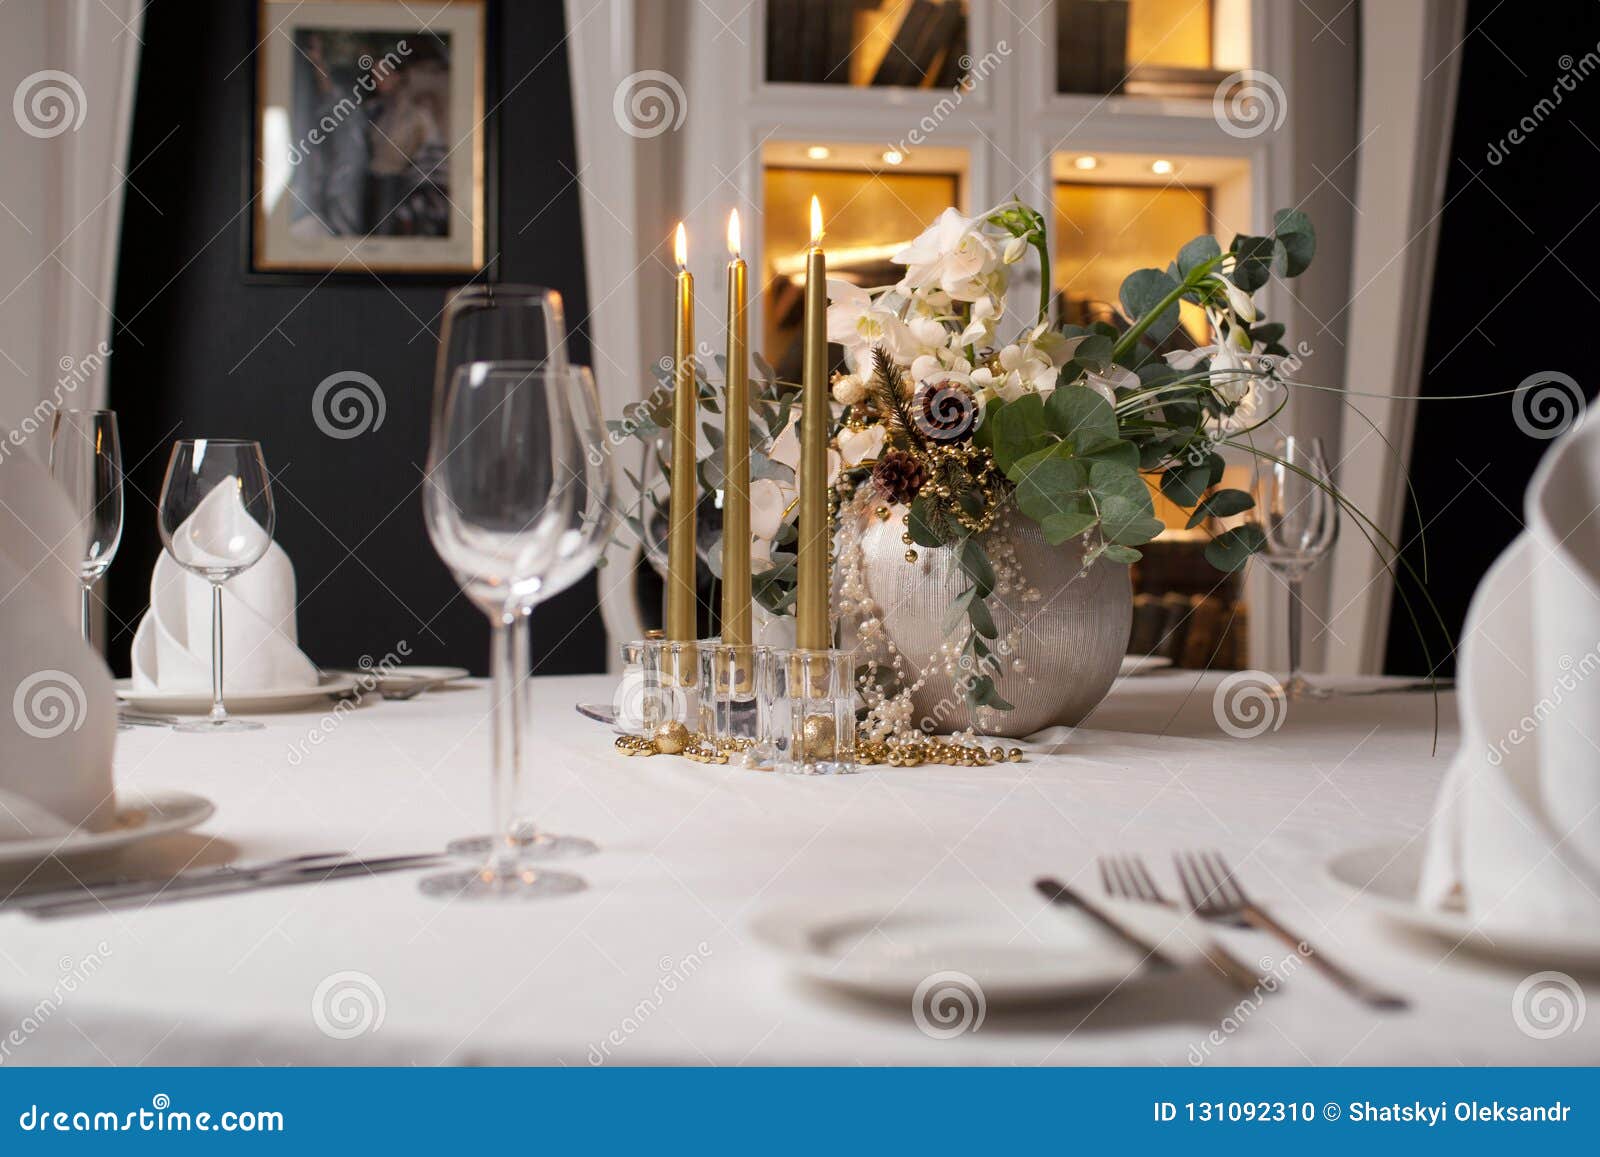 New Year Table Decoration Stock Photo Image Of Hands 131092310